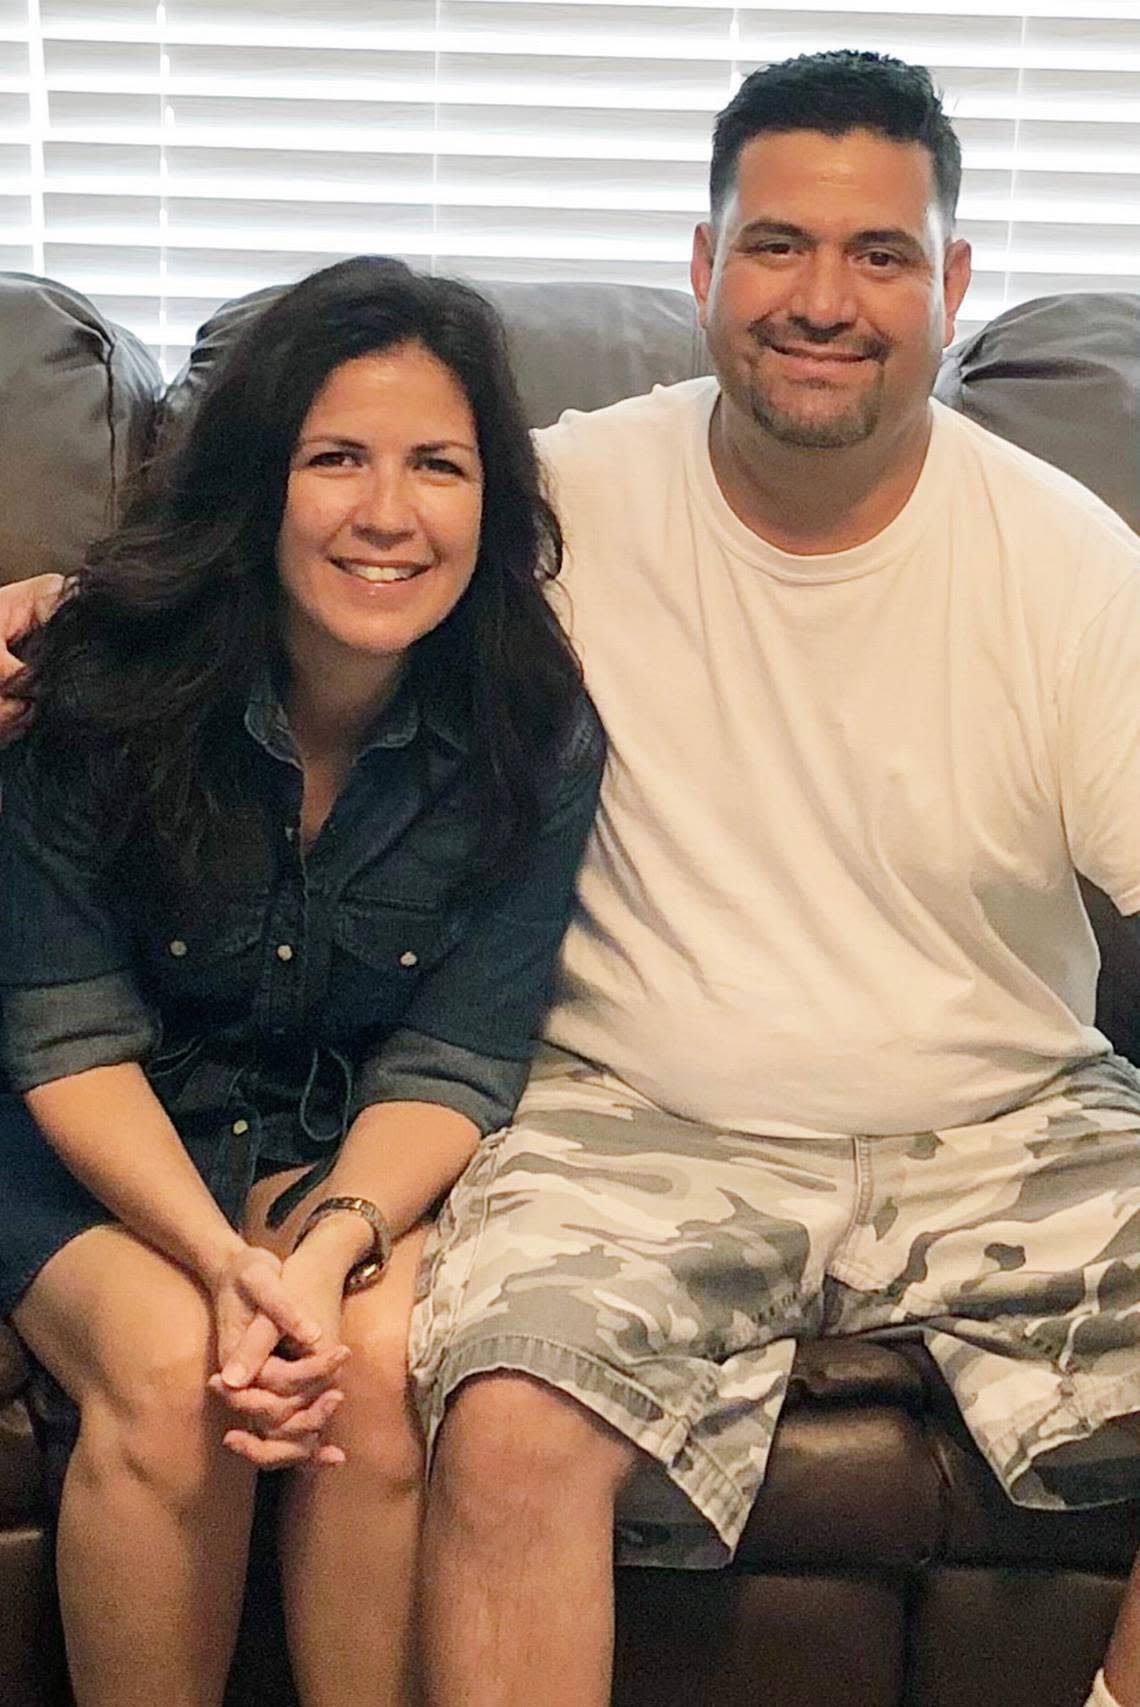 Douglas County District Attorney Suzanne Valdez and her brother, Christopher Valdez, who died of fentanyl poisoning in Arizona in 2019.